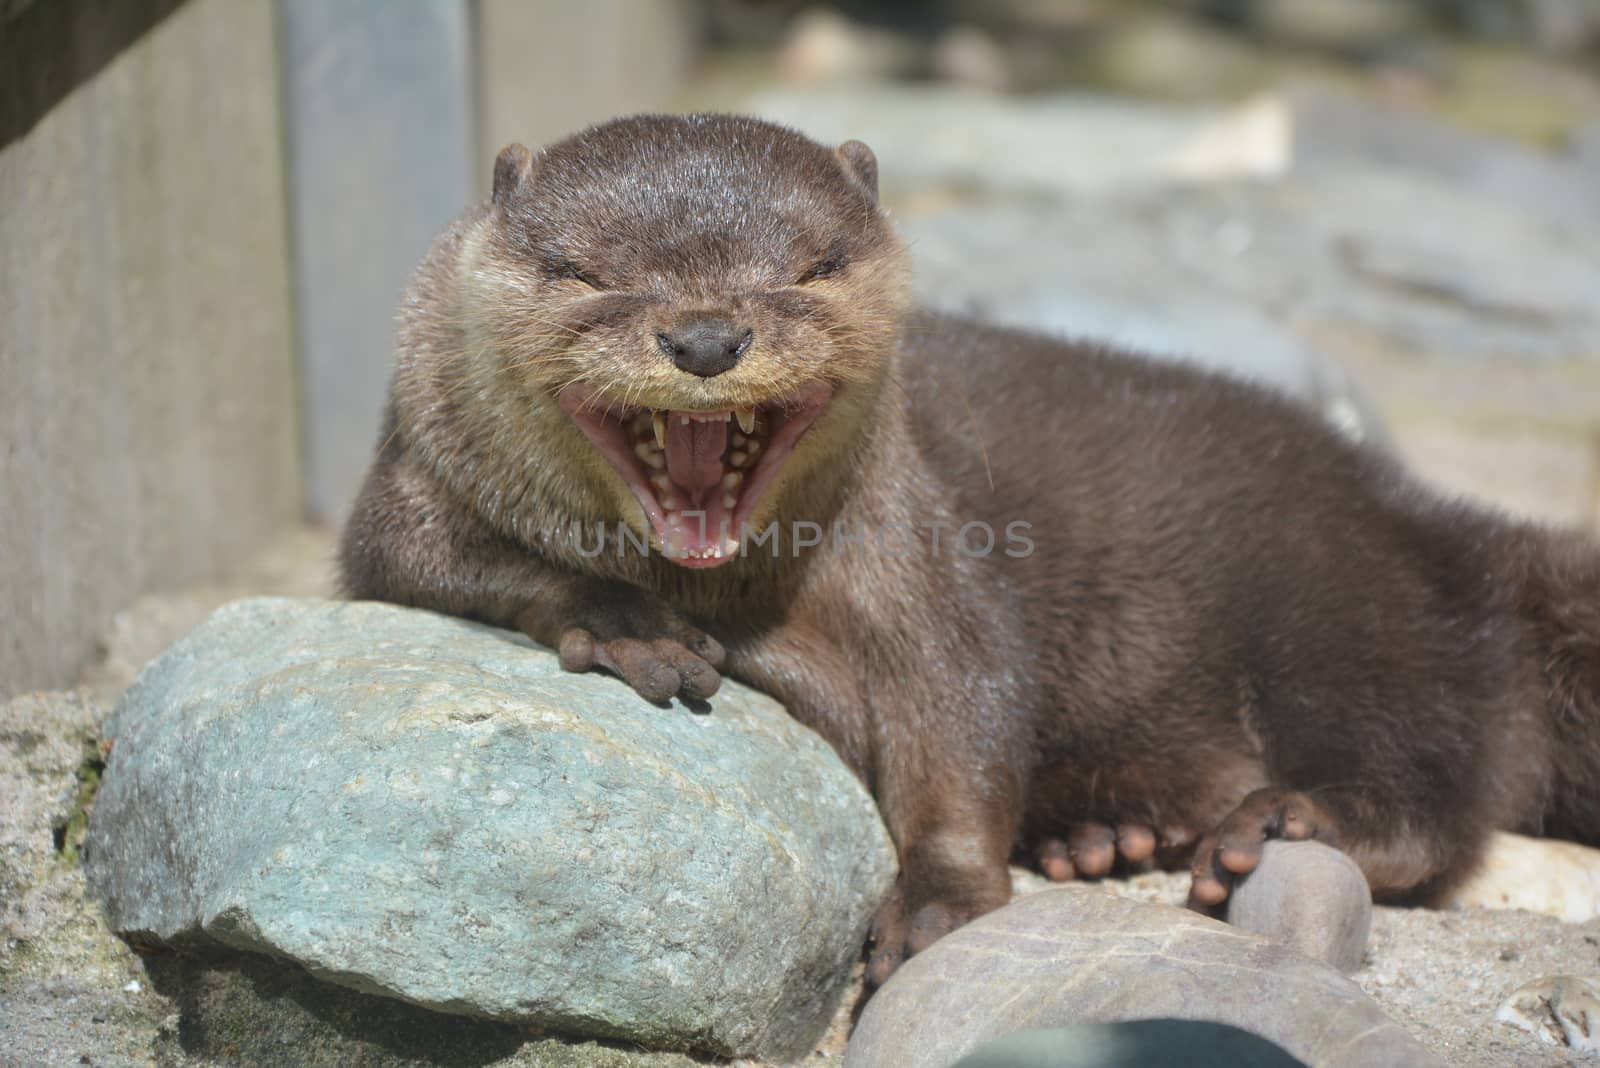 A giant otter warms himself in the warm sun